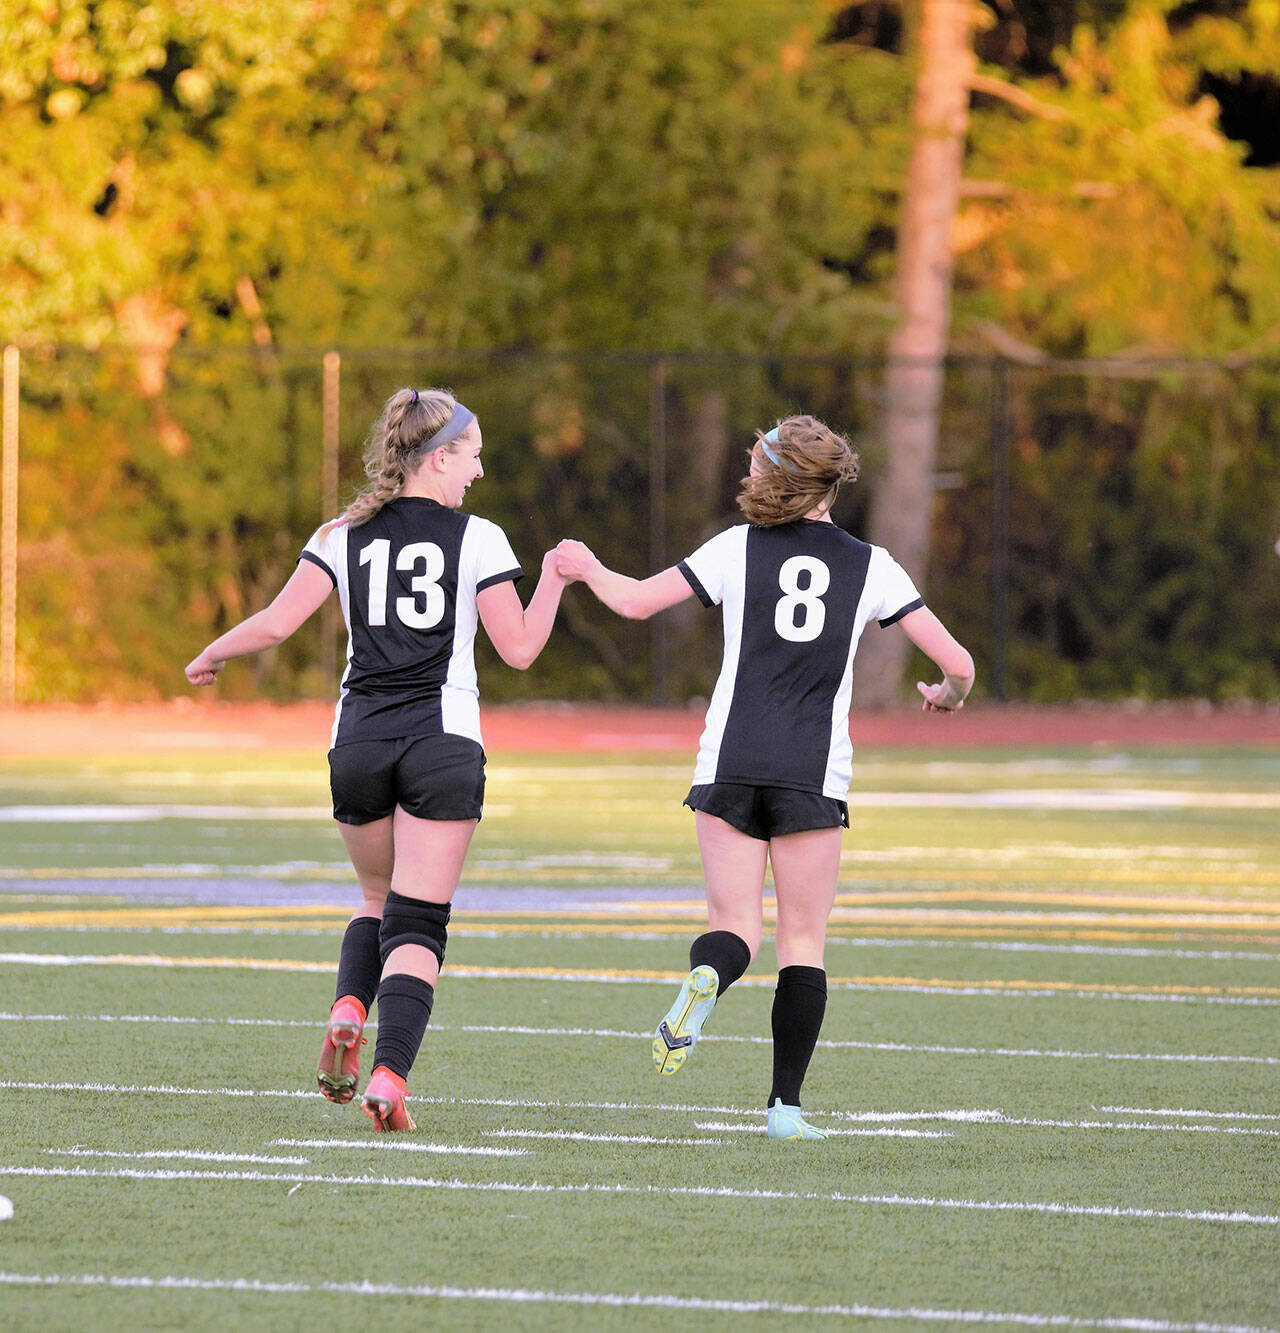 (Kelly Keenan Photo) Mallory Keenan and Olivia Boyes, celebrating one of their goals together.